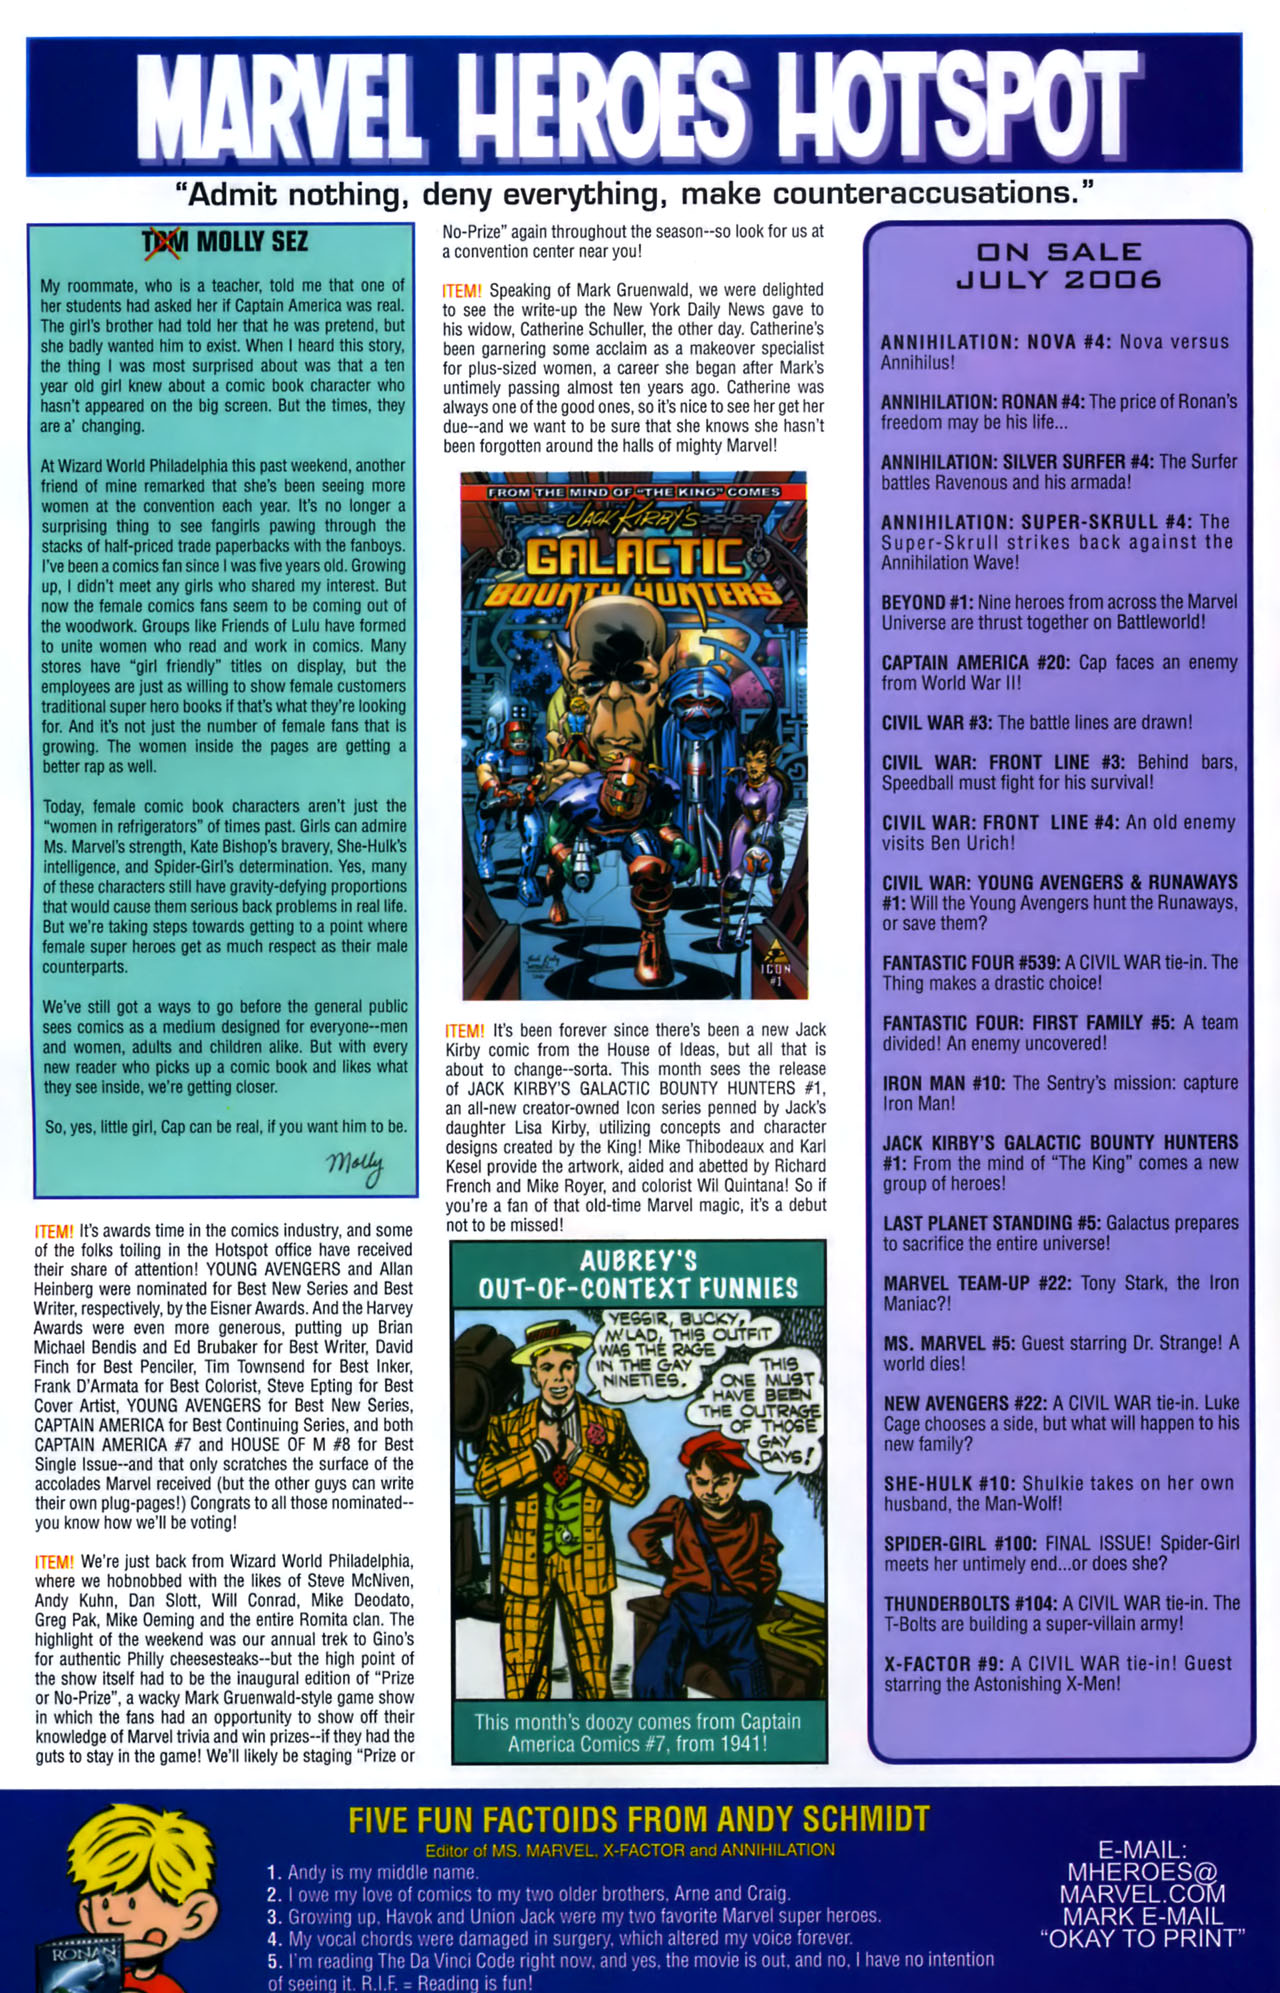 Read online Last Planet Standing comic -  Issue #5 - 24